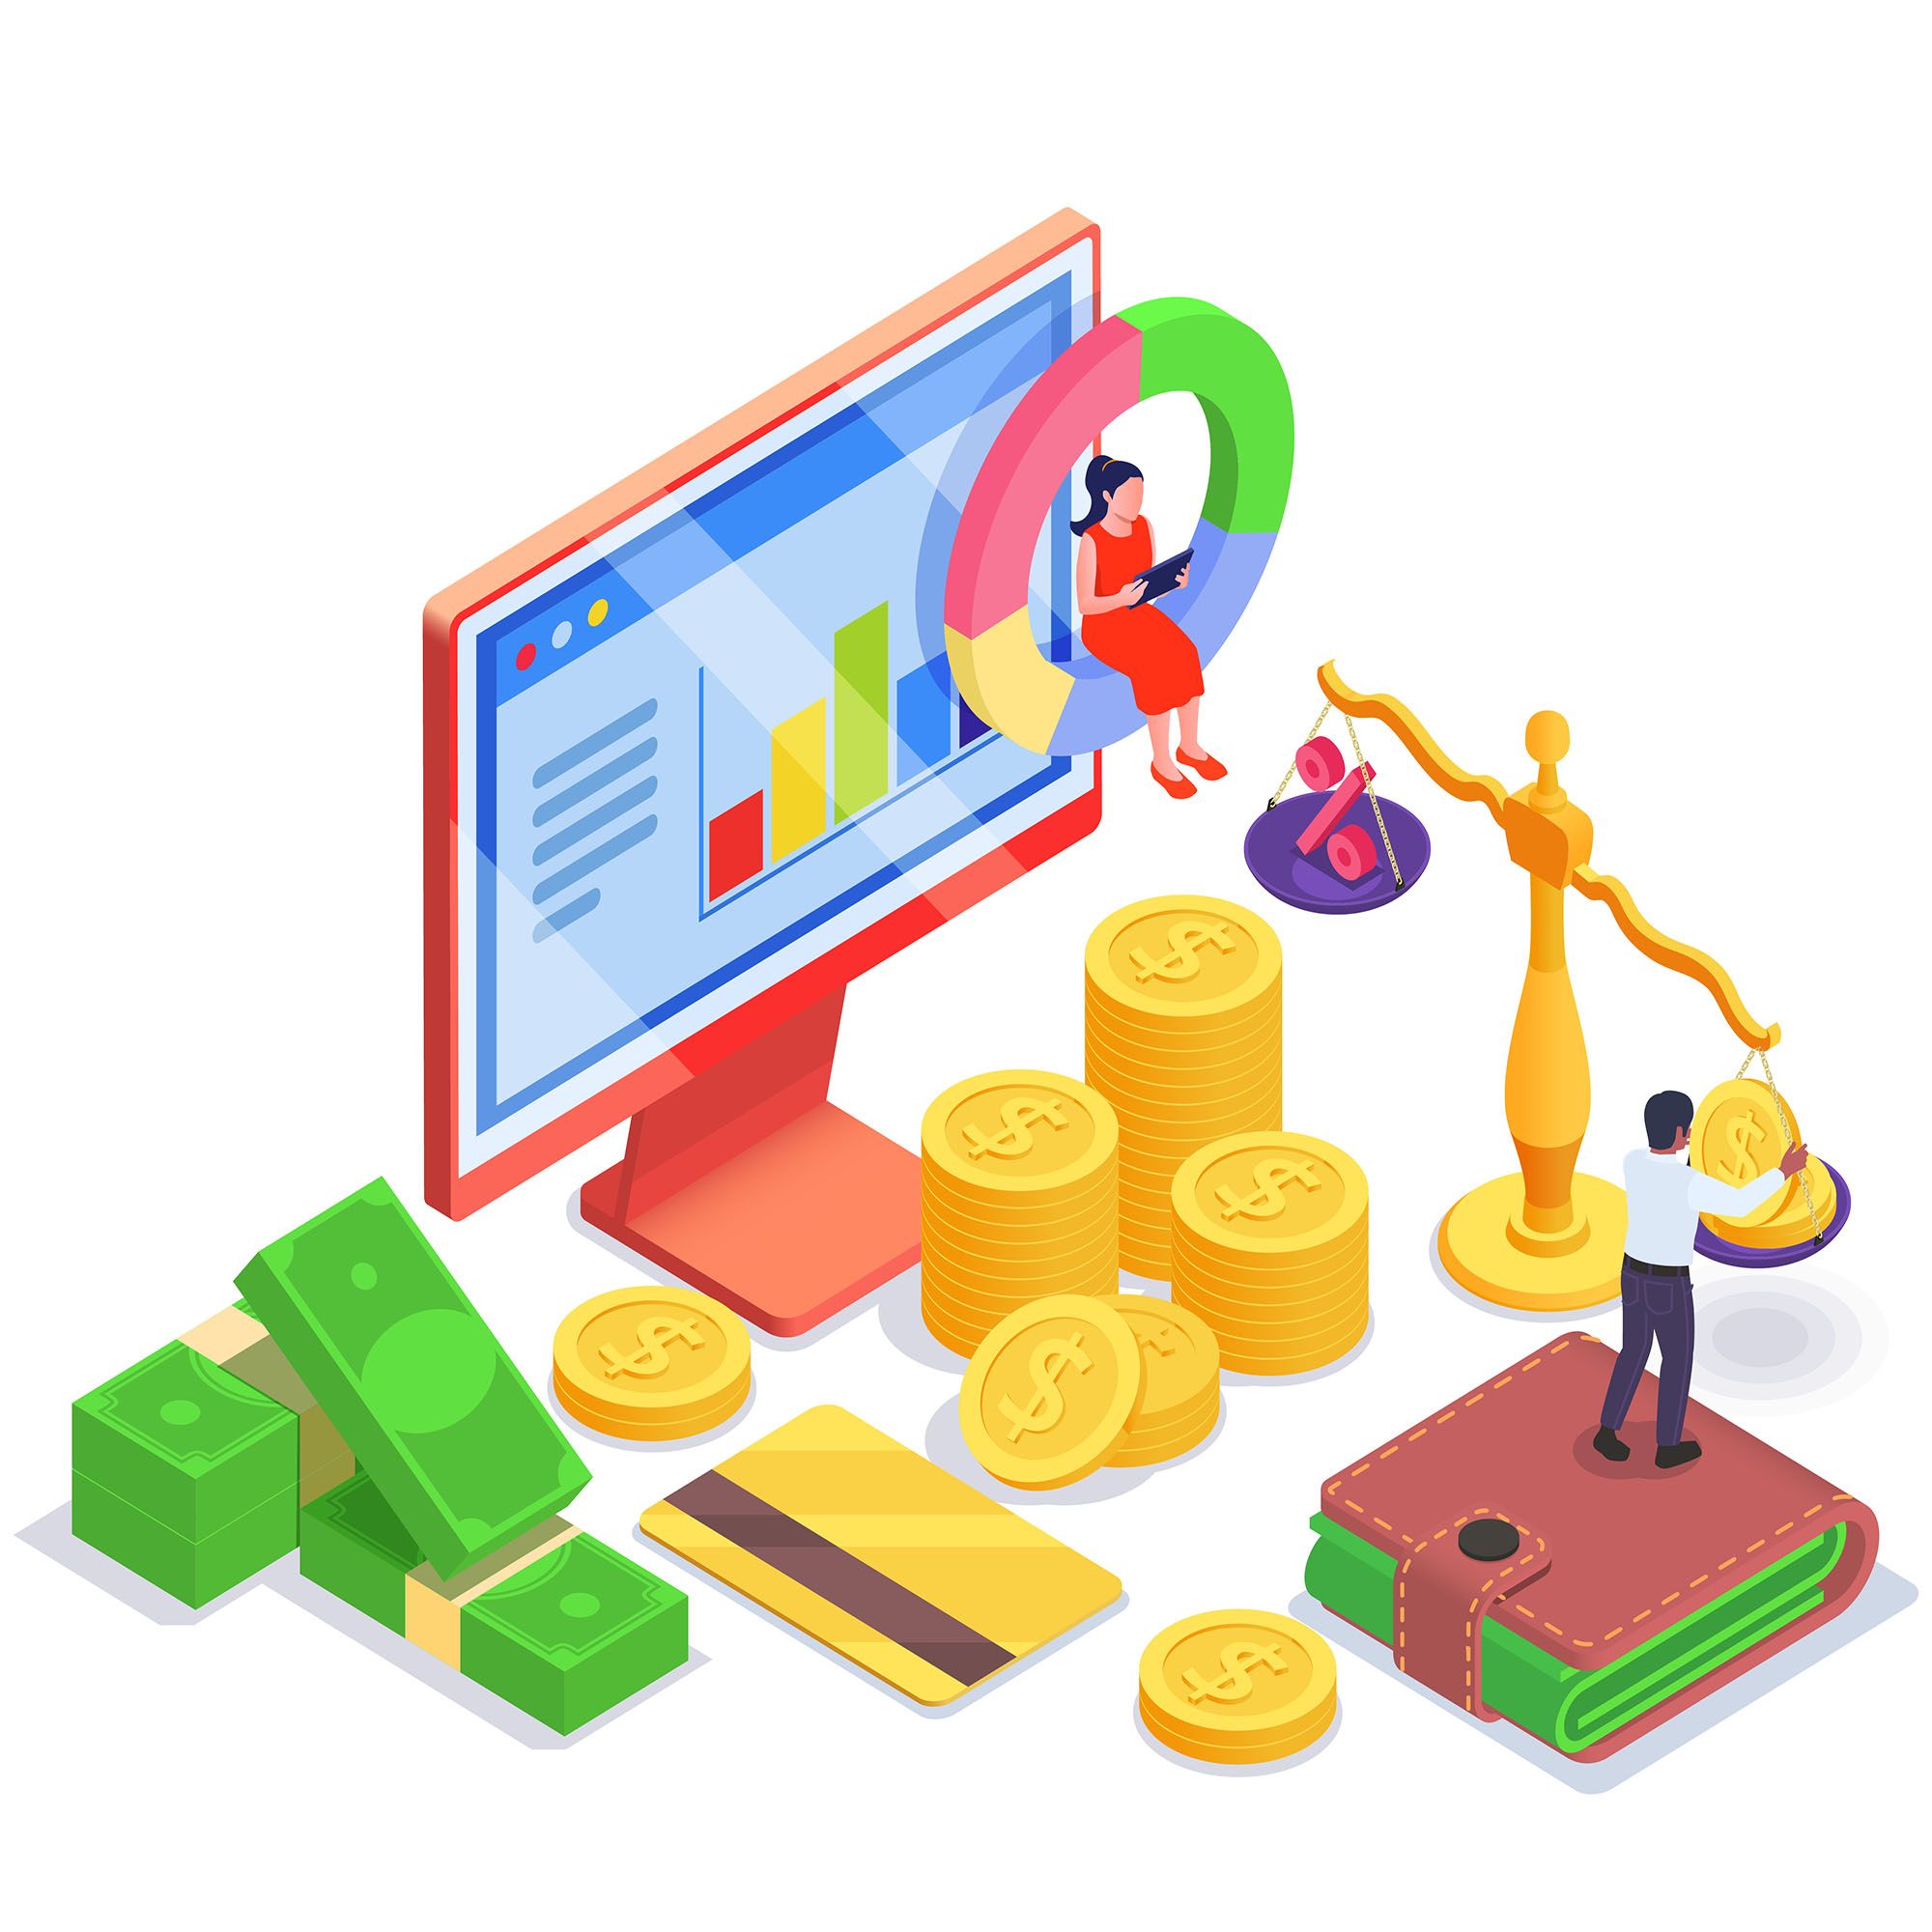 Financial education literacy isometric concept abstract situation of two people and around them the elements and devices for money circulation vector illustration